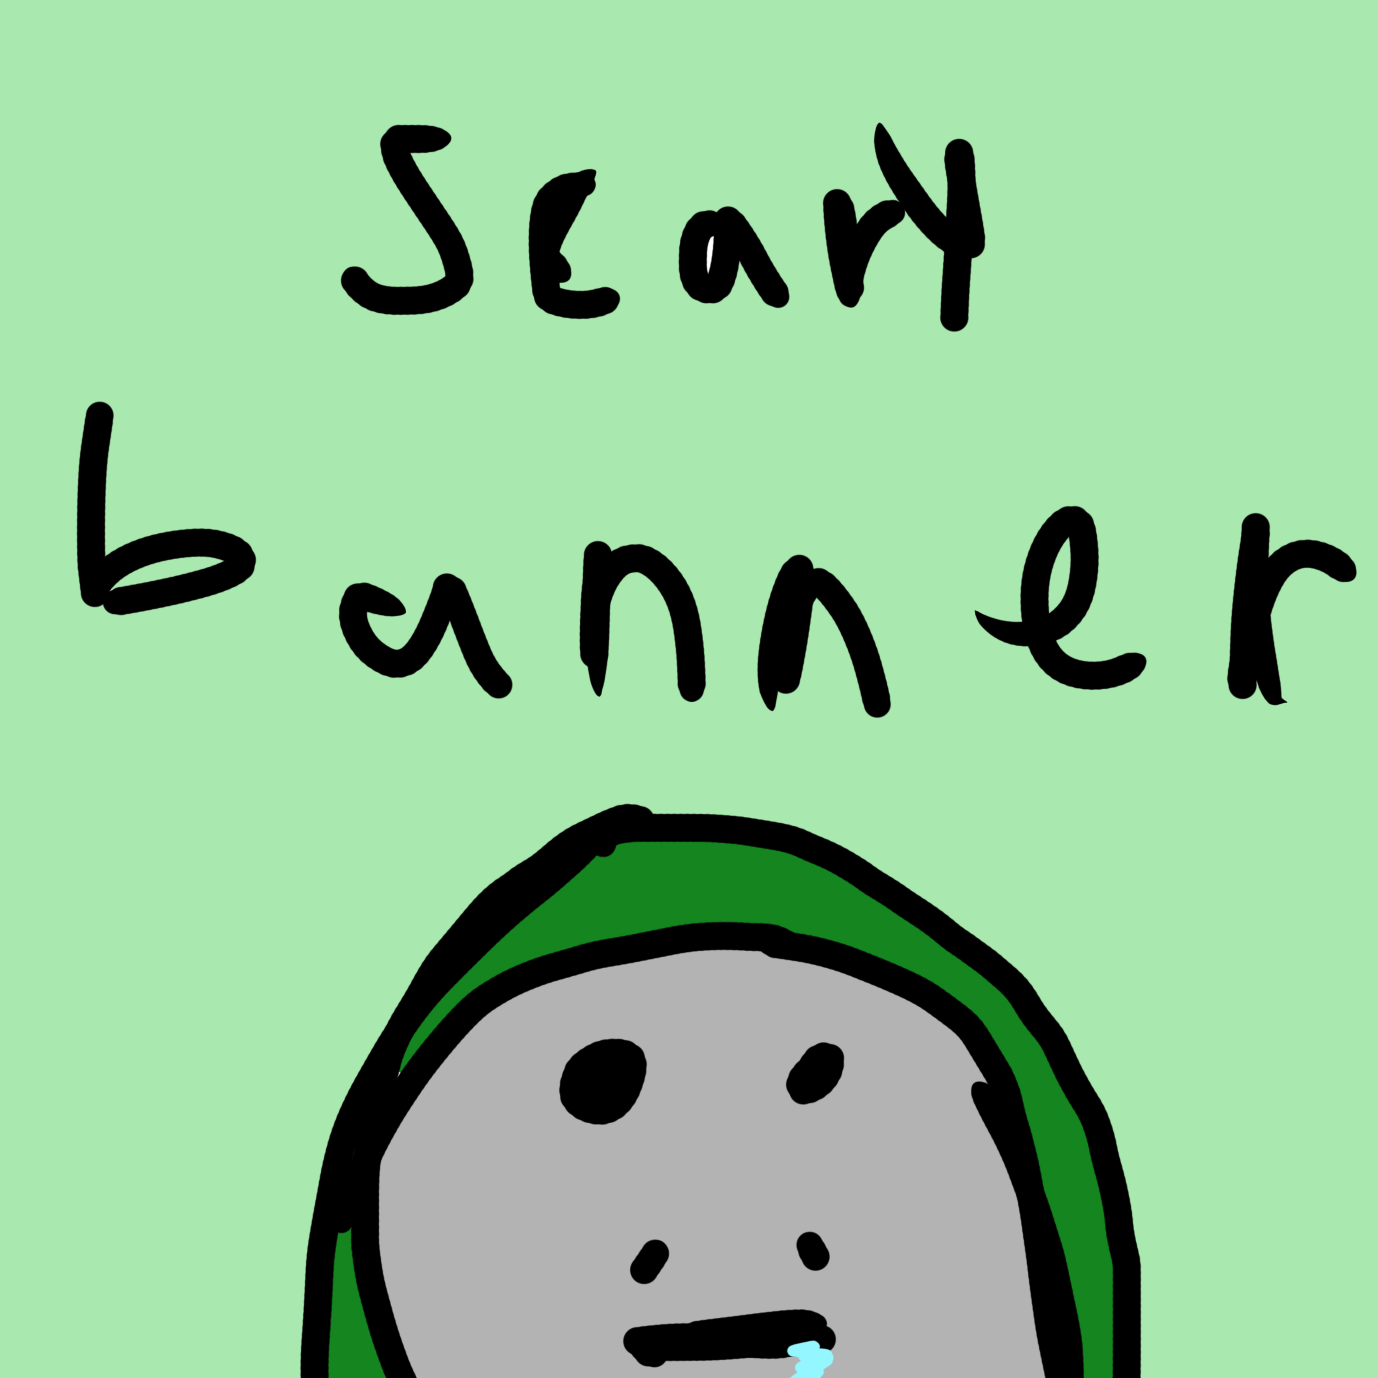 The Scary Monkers